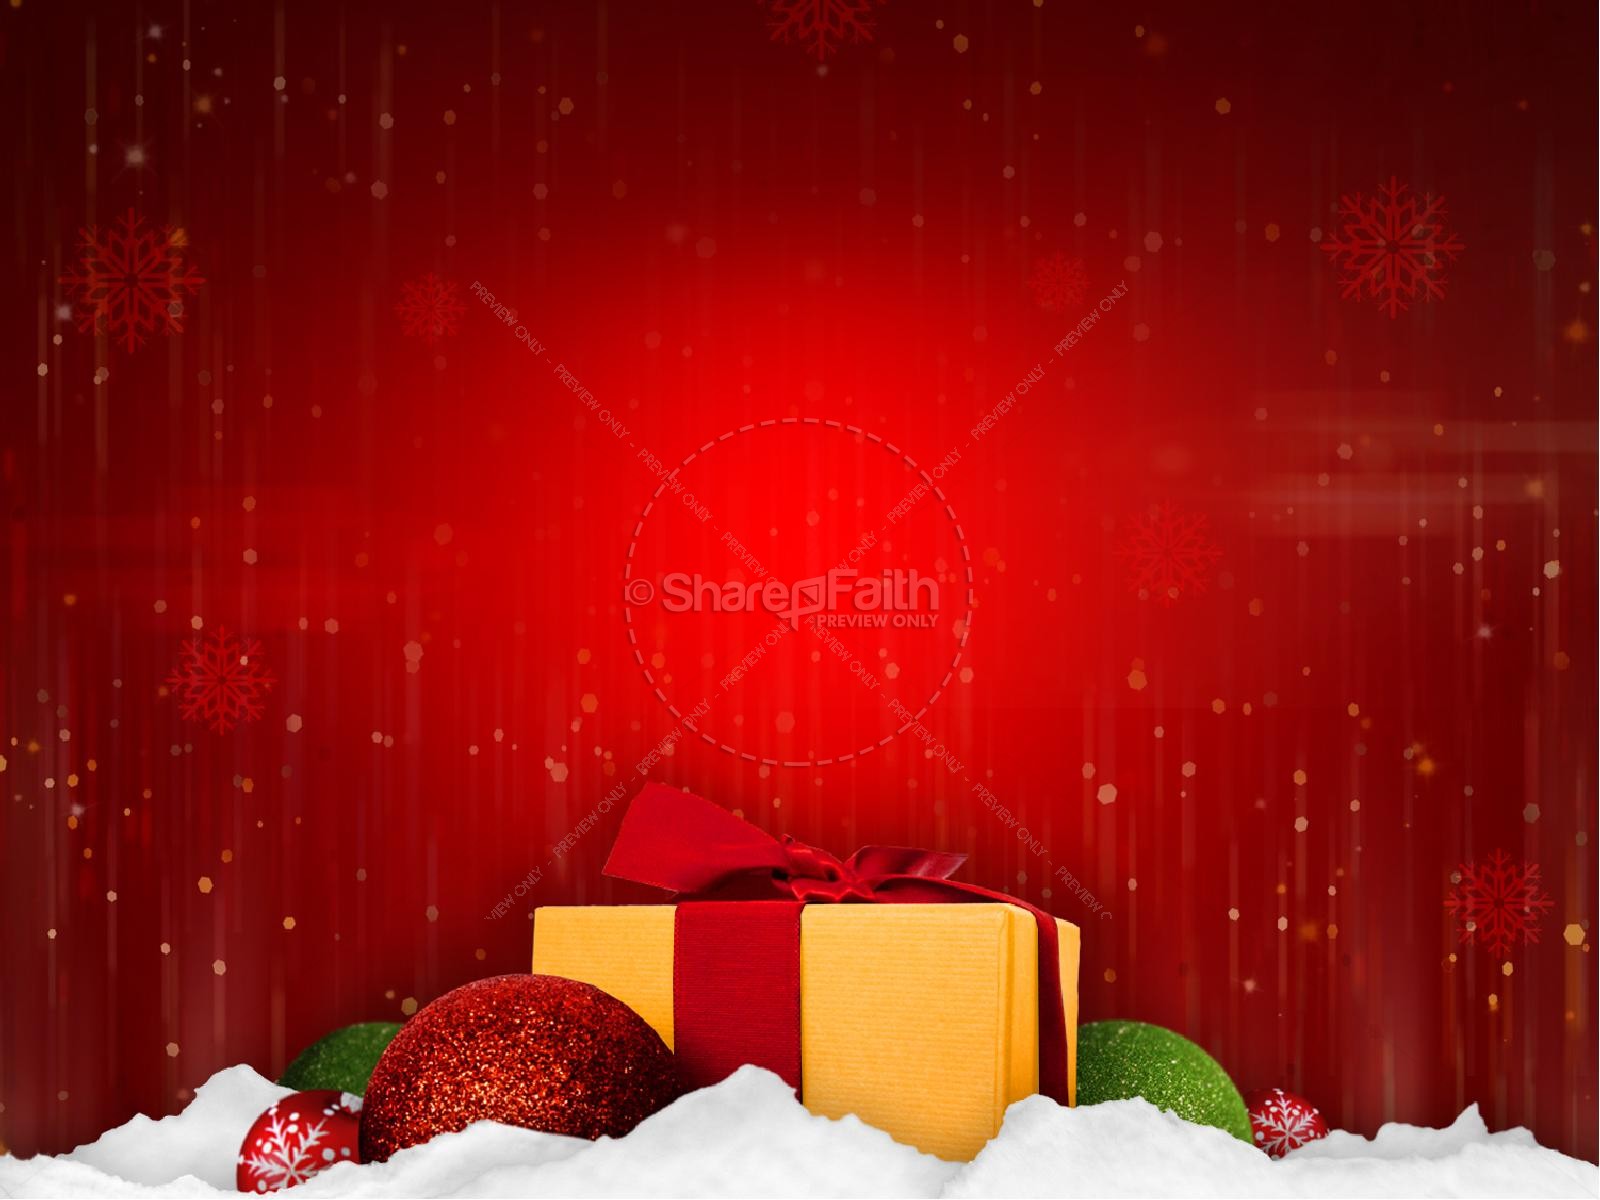 Merry Christmas Happy New Year Ministry PowerPoint Thumbnail 5